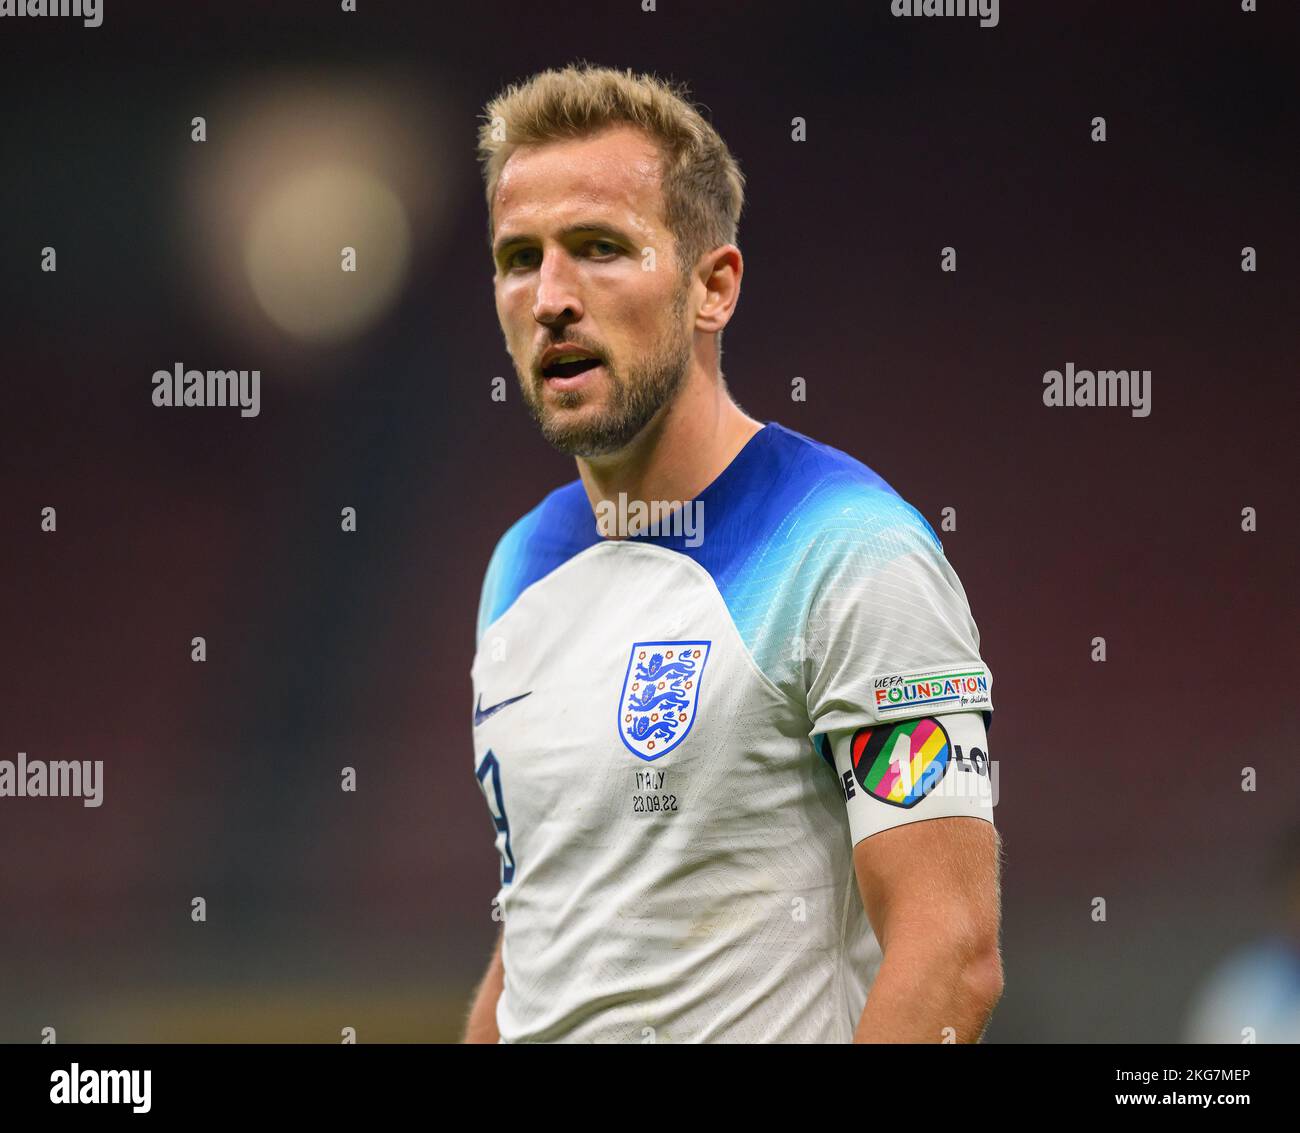 22 Nov 2022 - Italy v England - UEFA Nations League - Group 3 - San Siro  **** File Photo ****  England Captain Harry Kane wears the One Love Rainbow Armband during the UEFA Nations League match against Italy. He has been banned from weraing the armband by FIFA during the Qatar World Cup 2022.  Picture : Mark Pain / Alamy Stock Photo